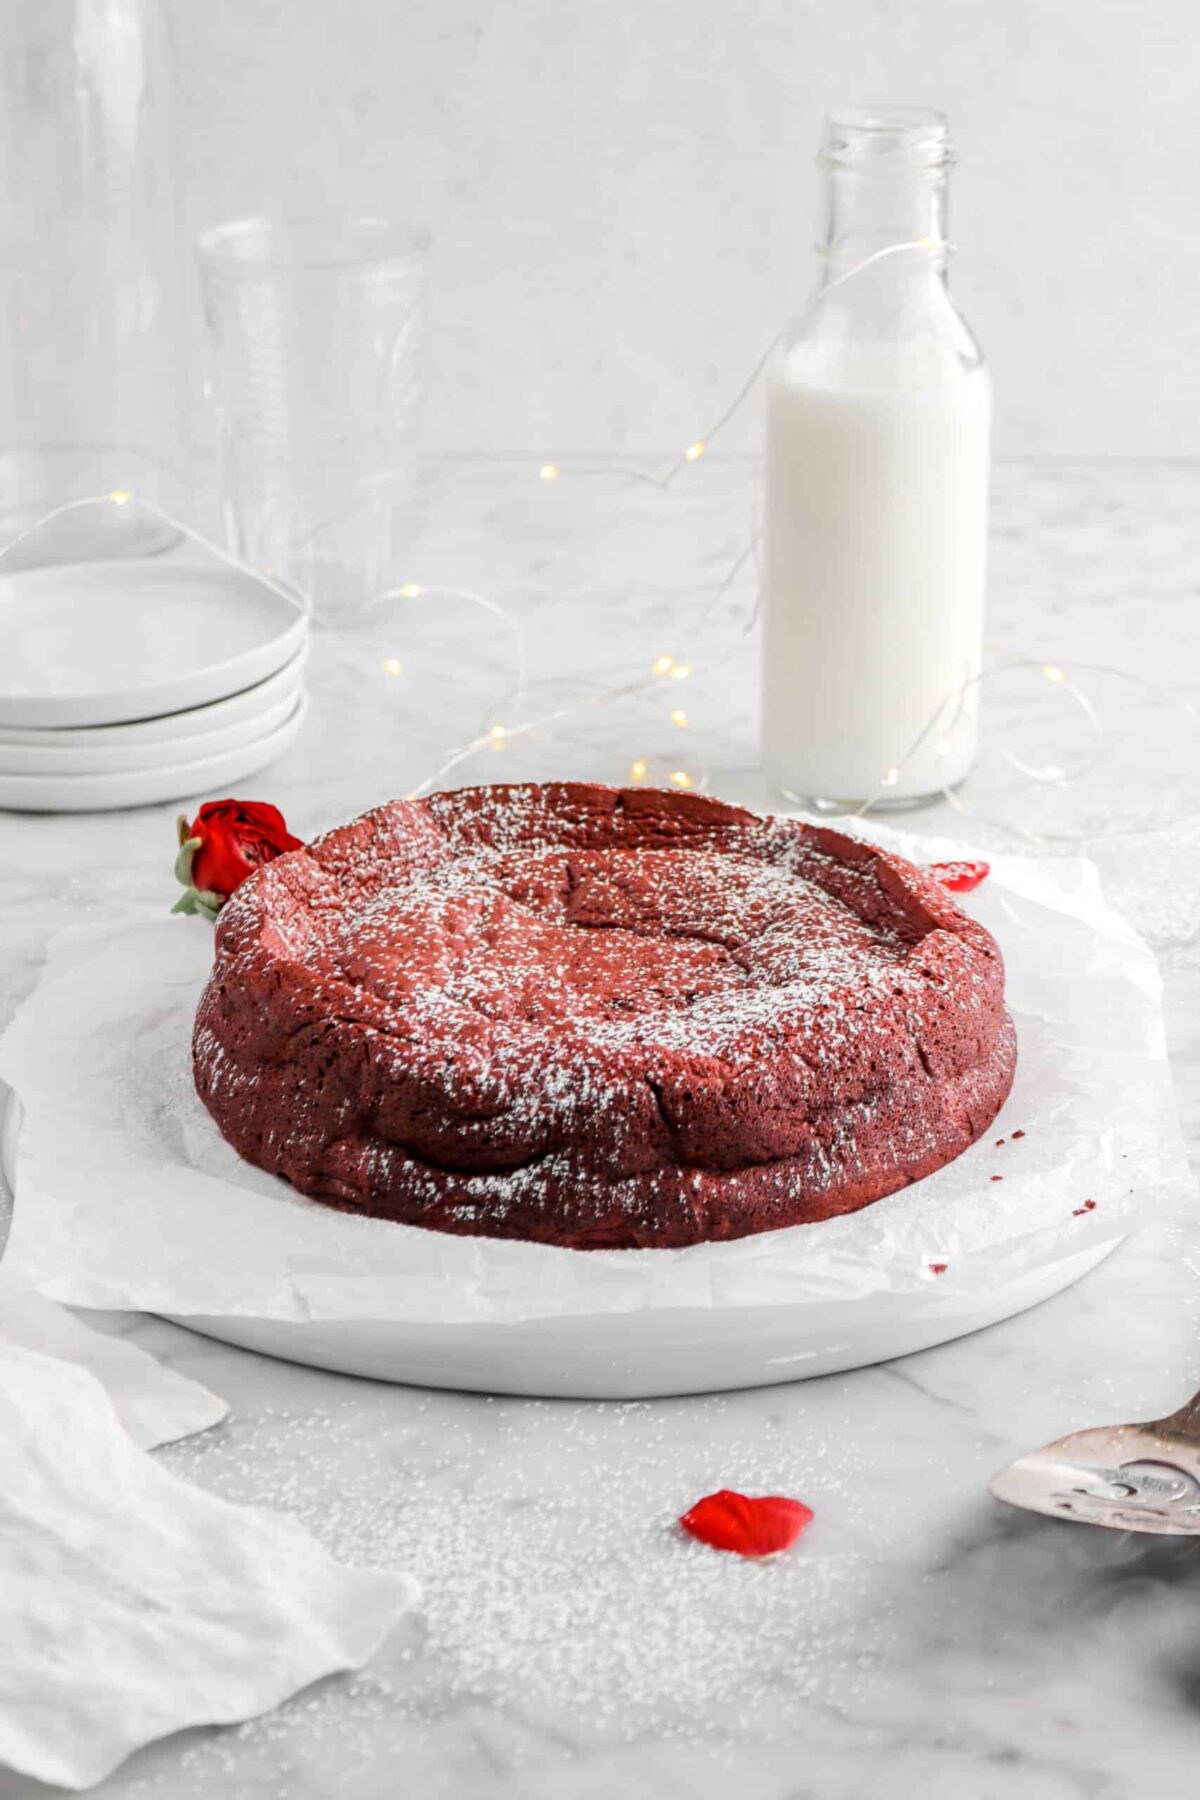 flourless red velvet cake on upside white palte with glass of milk, stacked plates, and powdered sugar